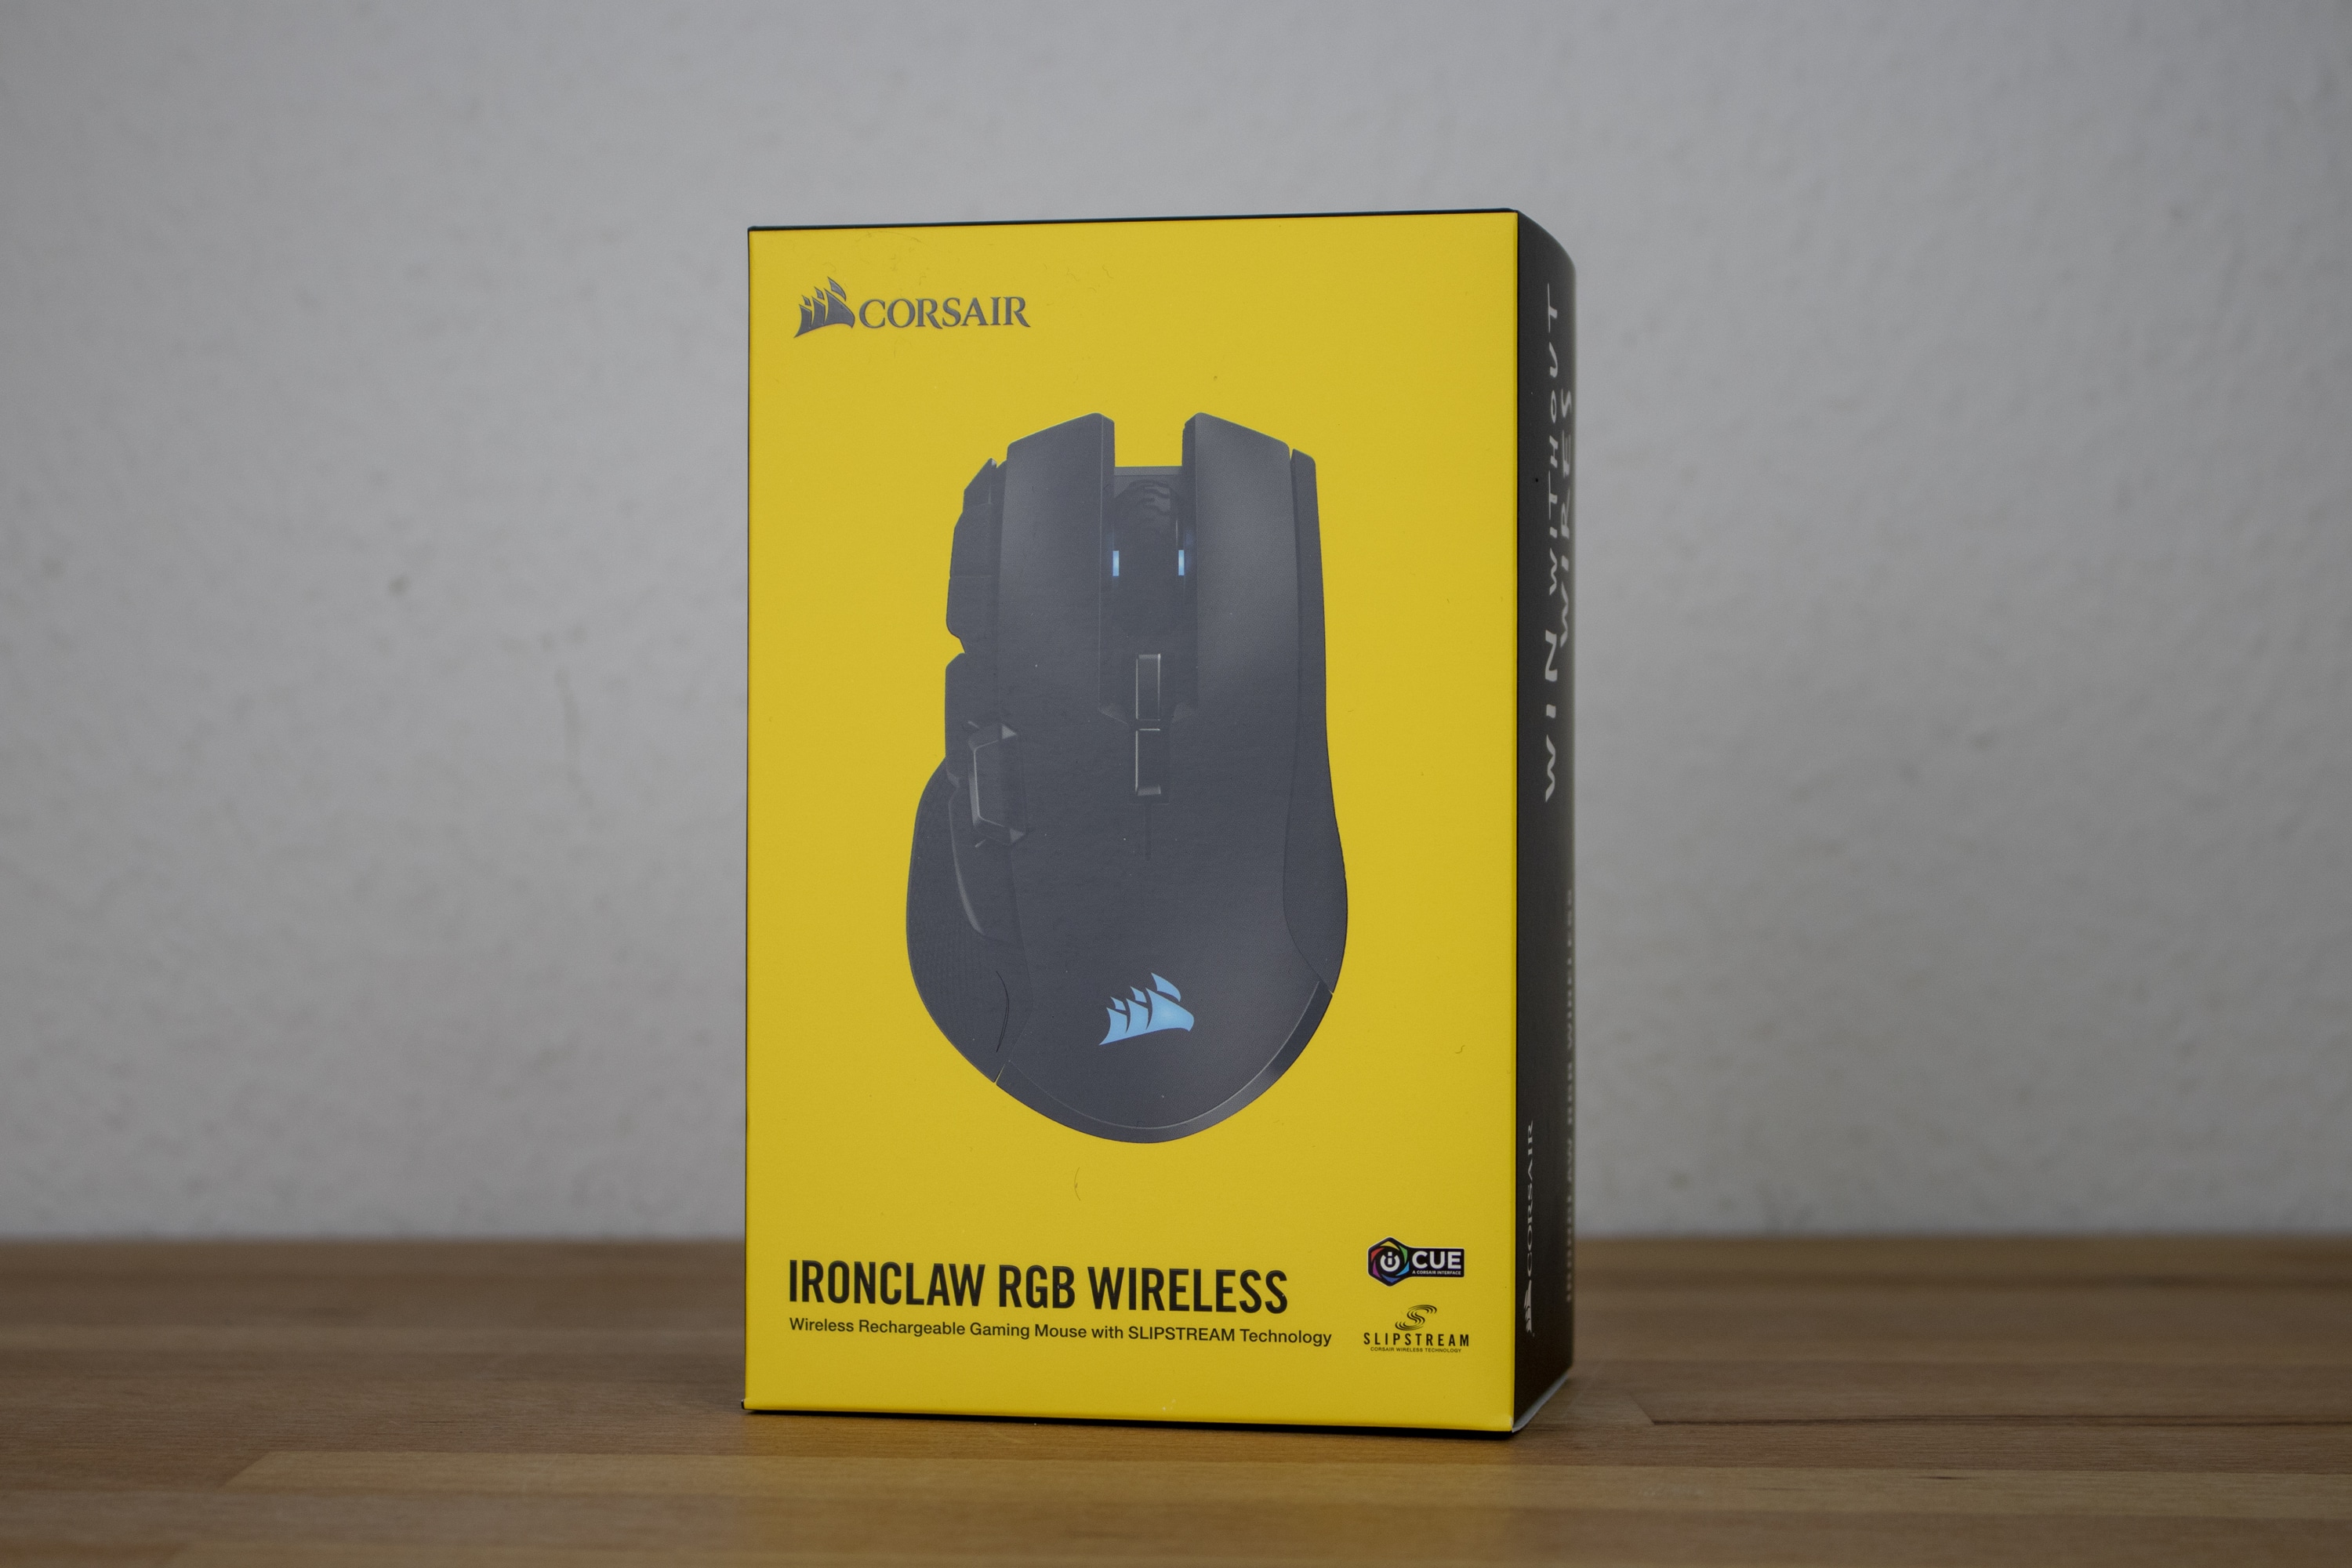 Ironclaw RGB Wireless, le test complet - Page 2 sur 4 - GinjFo